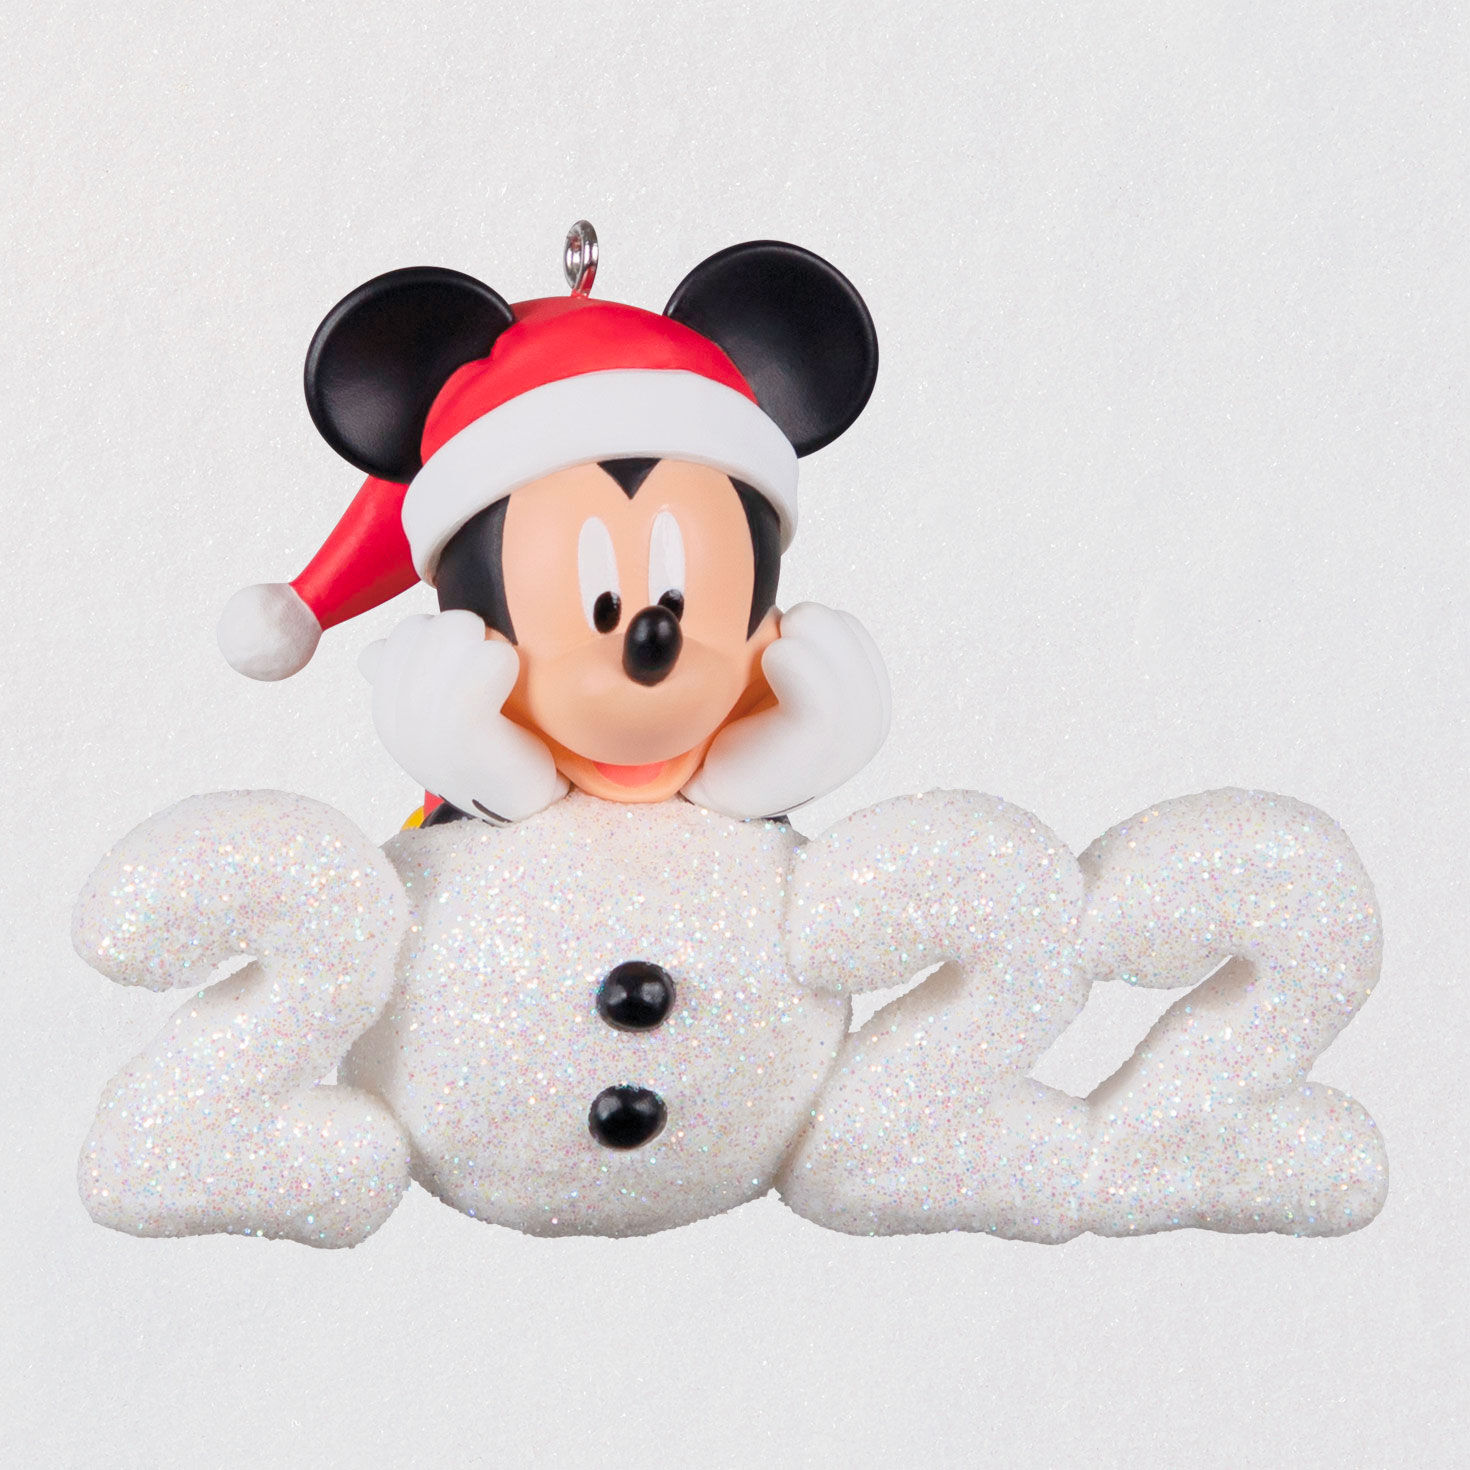 MICKEY OR MINNIE MOUSE GLASS ORNAMENTS by HALLMARK 